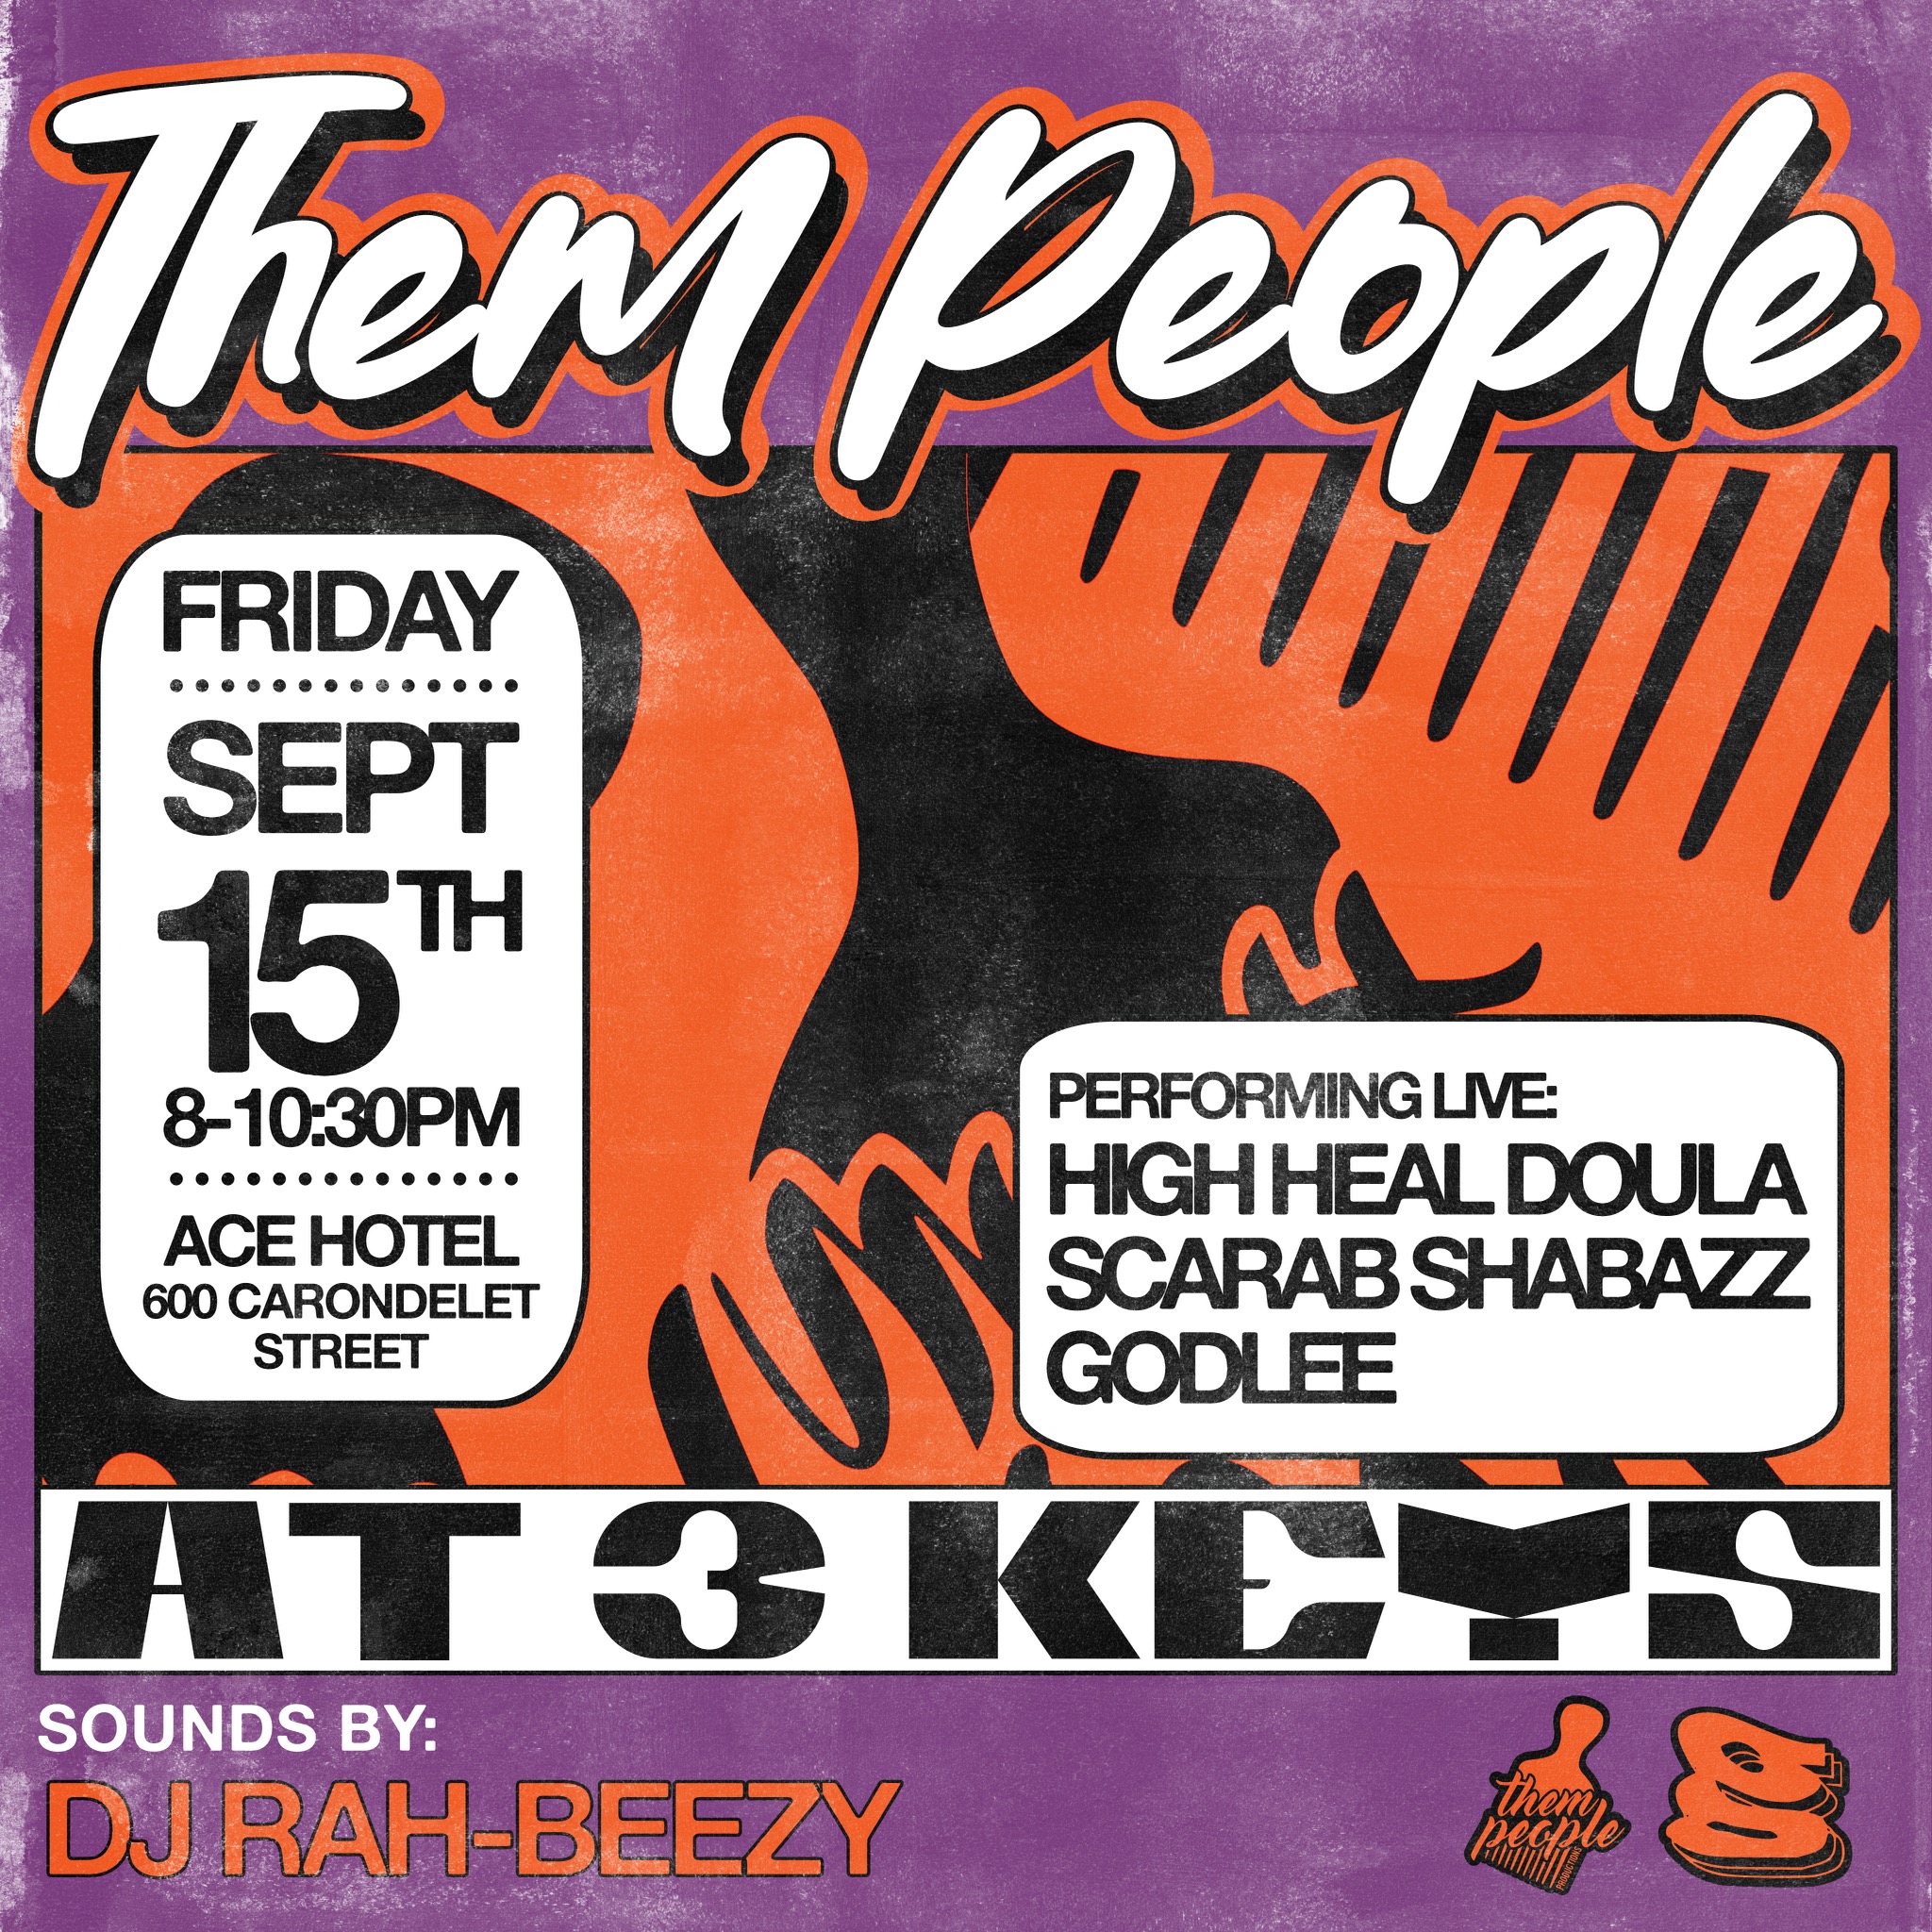 Them people productions promo